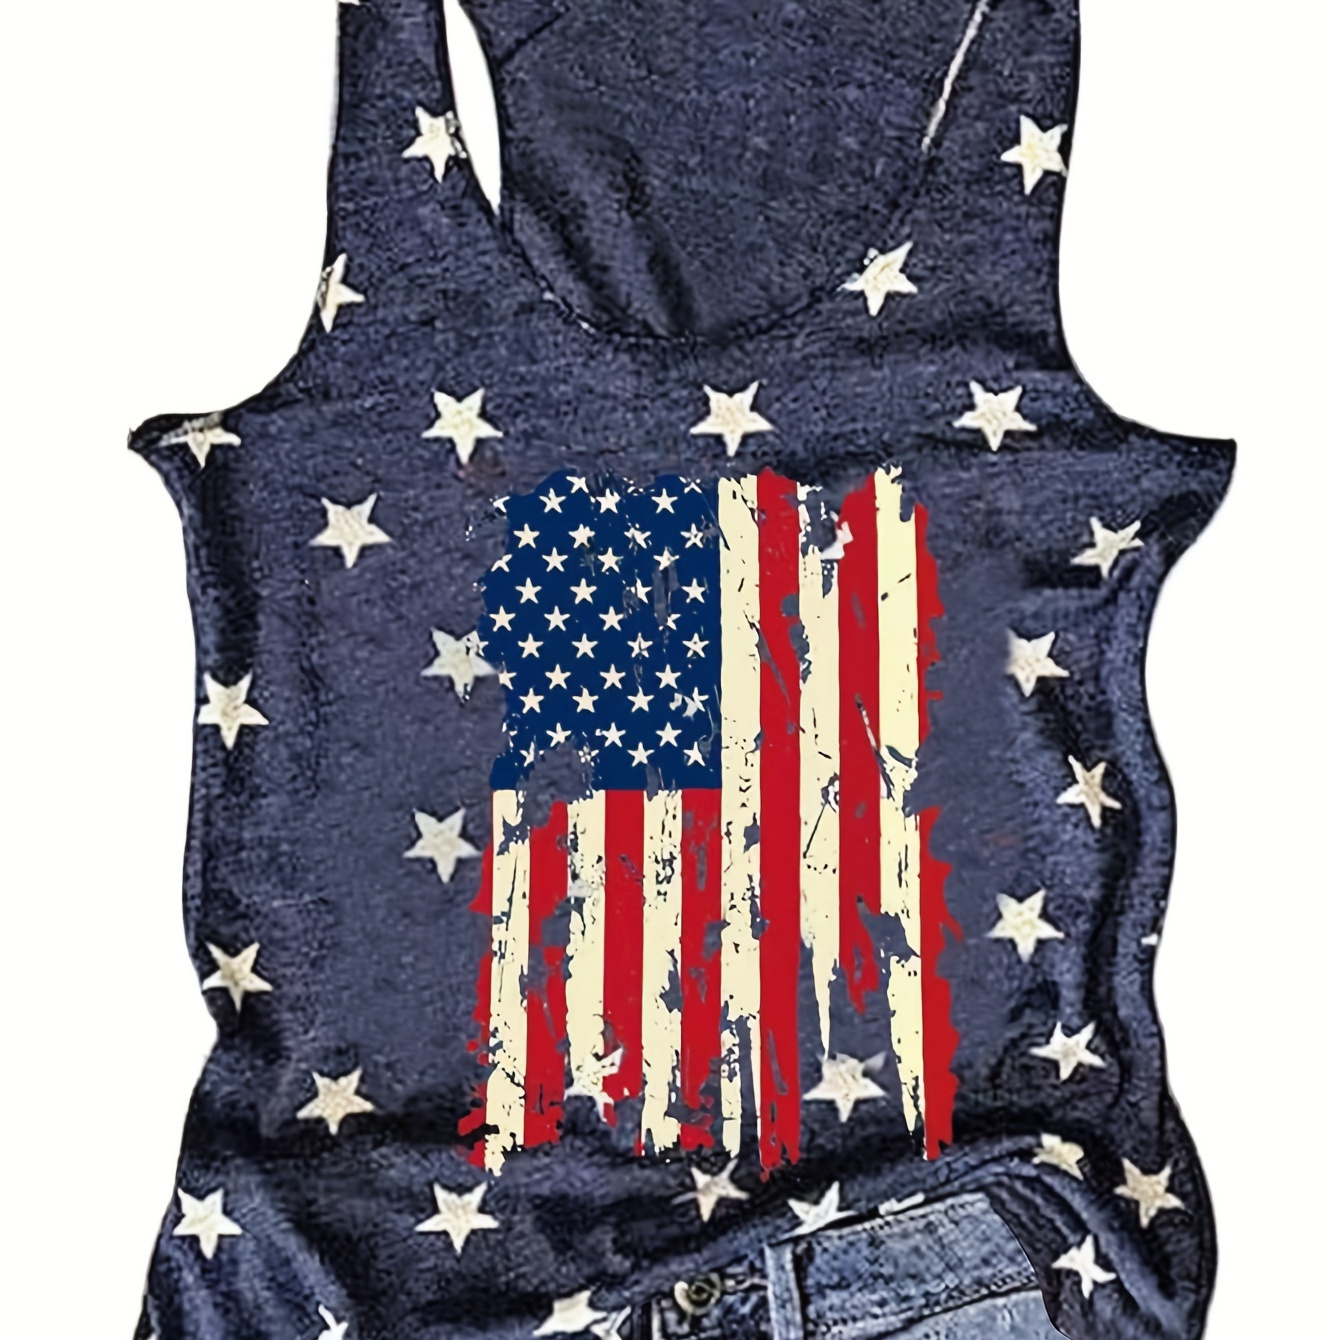 

Flag & Star Print Crew Neck Tank Top, Casual Sleeveless Tank Top For Summer, Women's Clothing